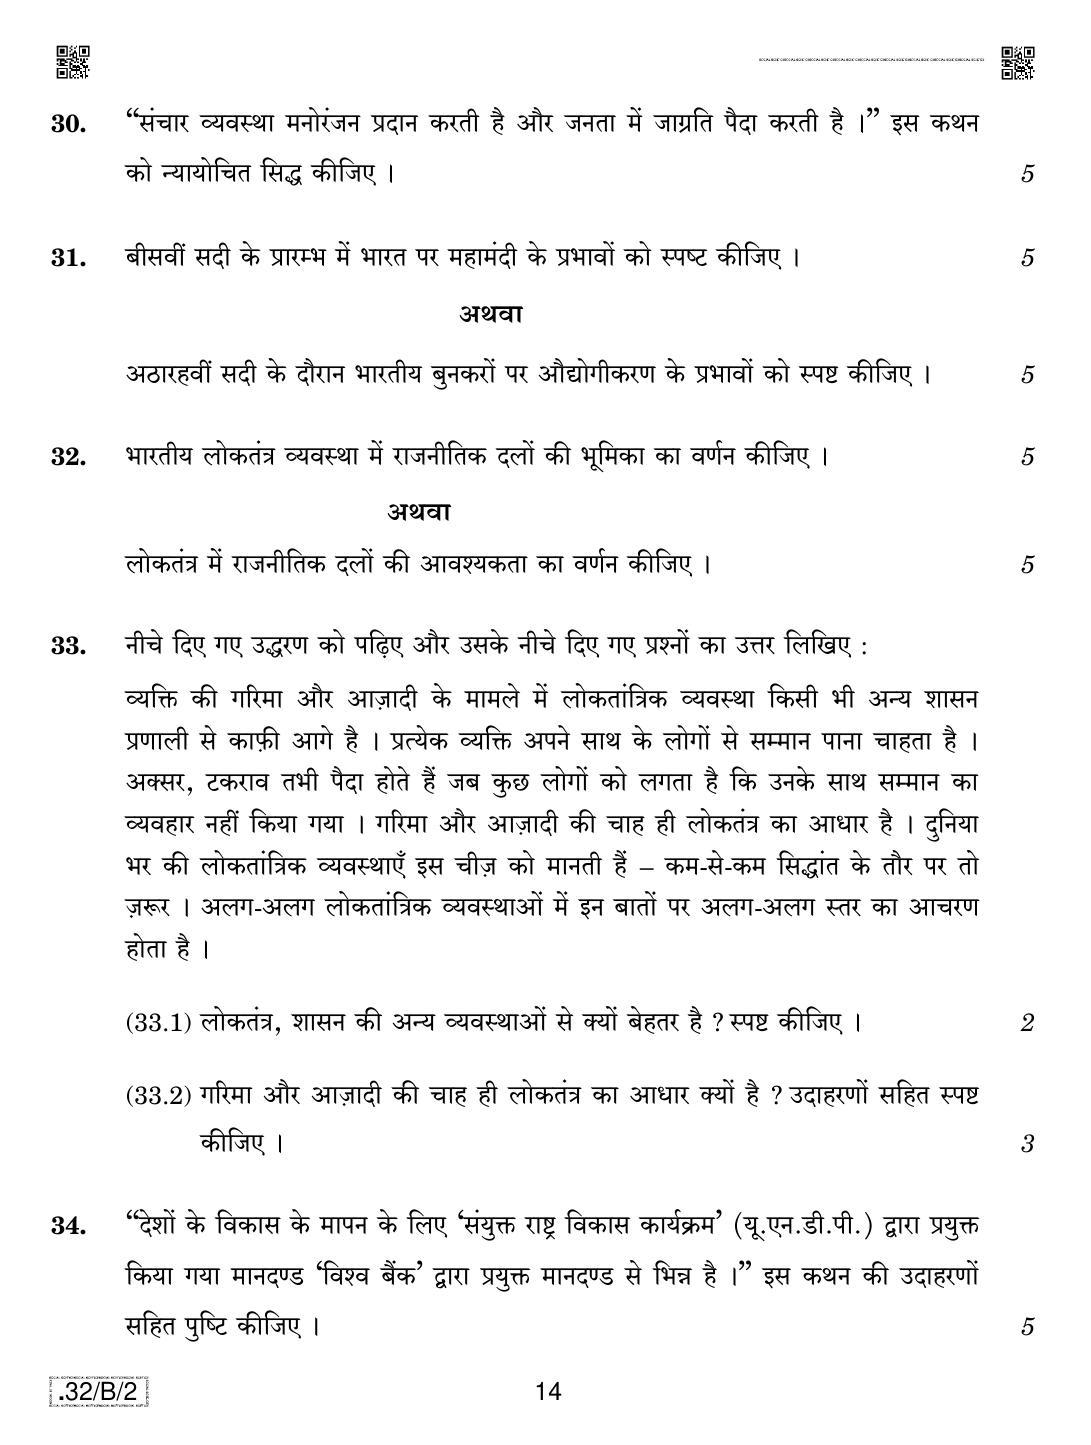 CBSE Class 10 32-C-2 Social Science 2020 Compartment Question Paper - Page 14